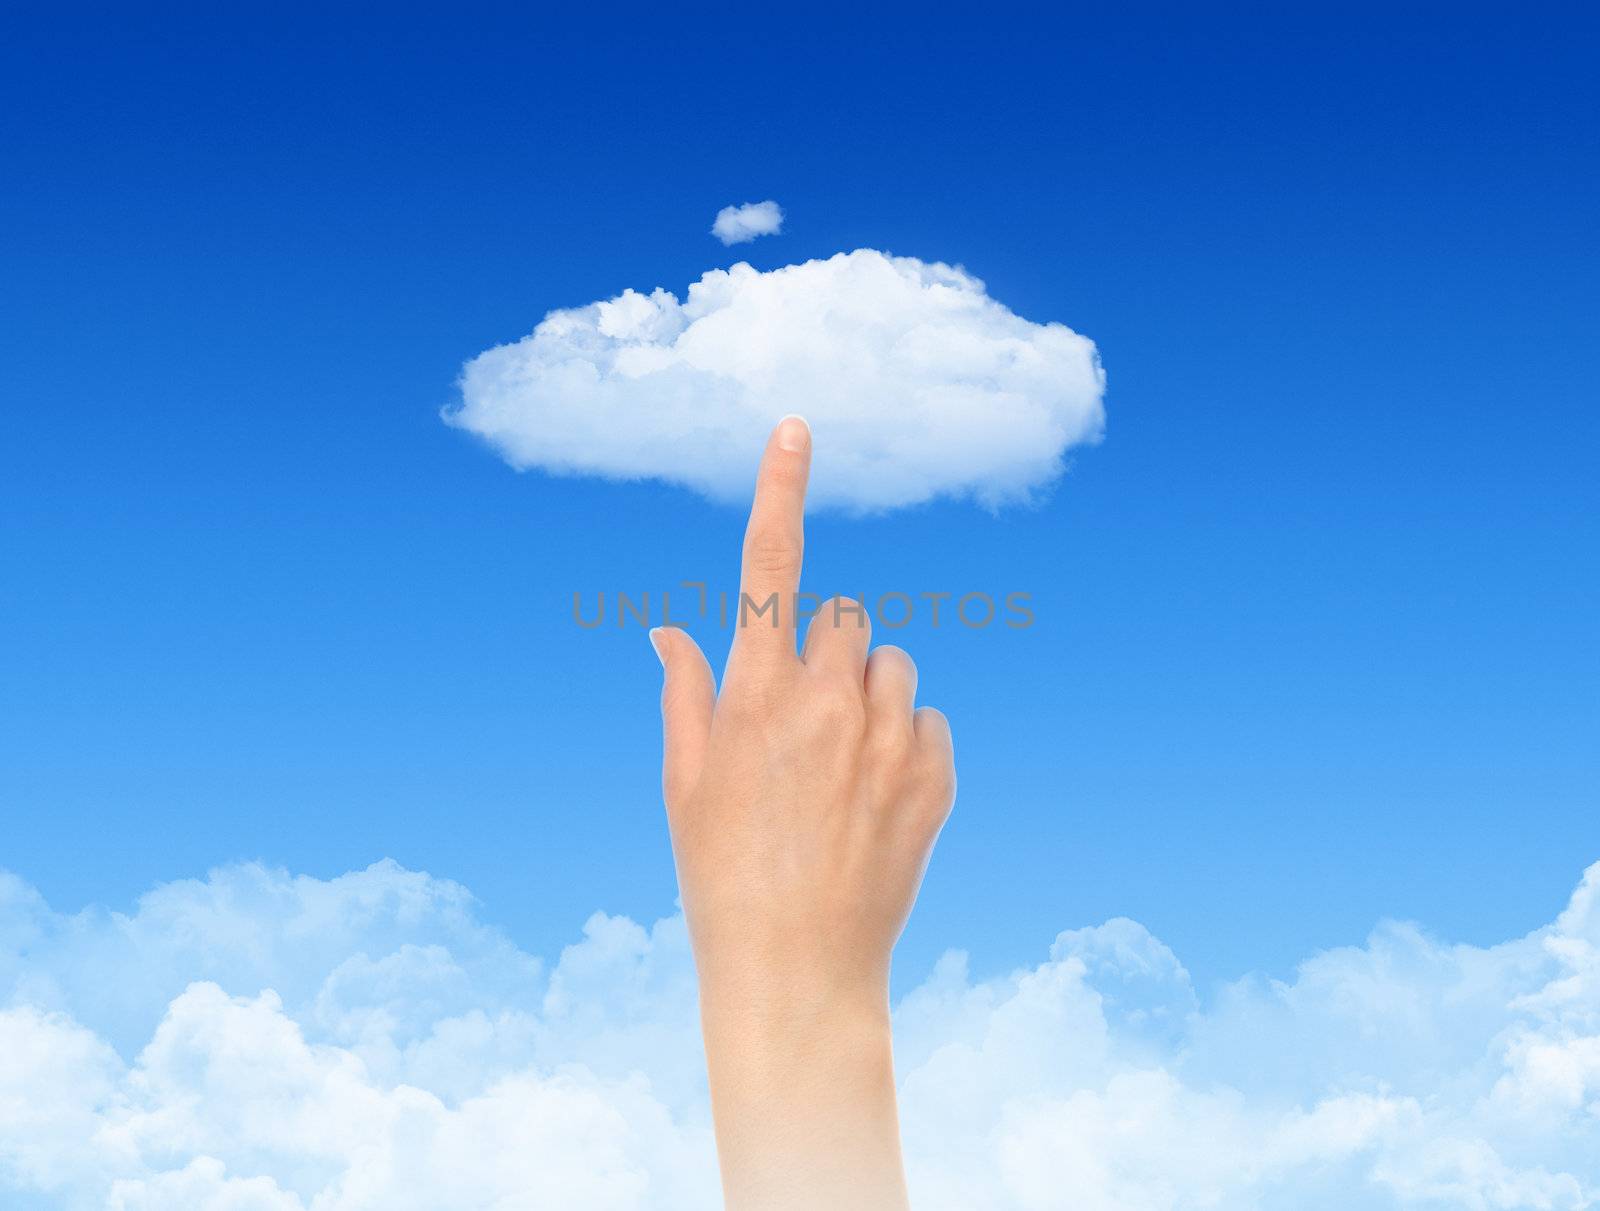 Woman hand touch the cloud against blue sky with clouds. Concept image on cloud computing and eco theme.